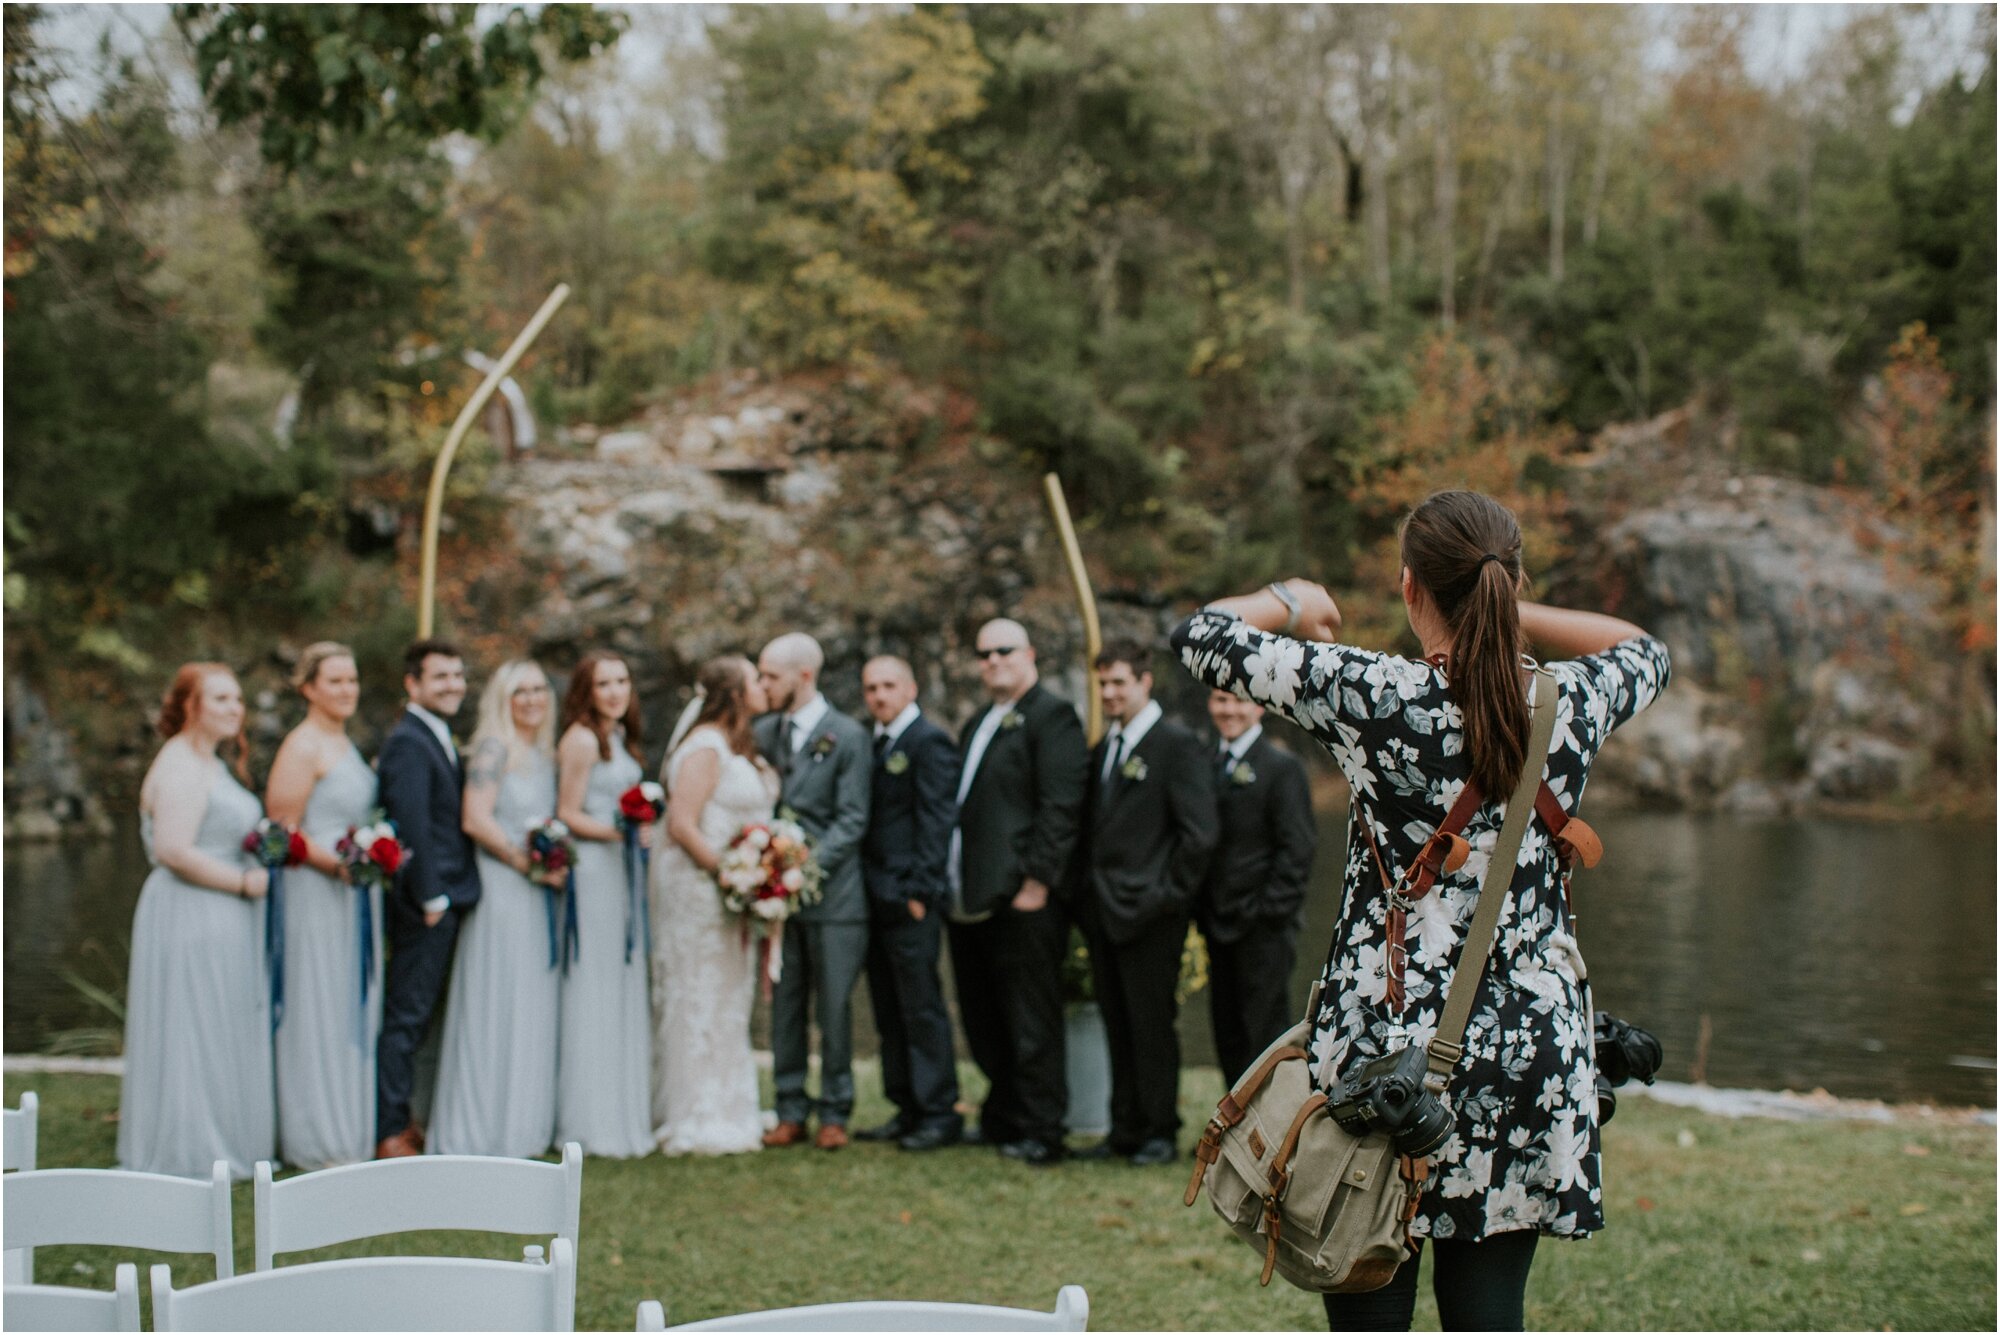   More bridal party directing!   Photo: Pam Burke  